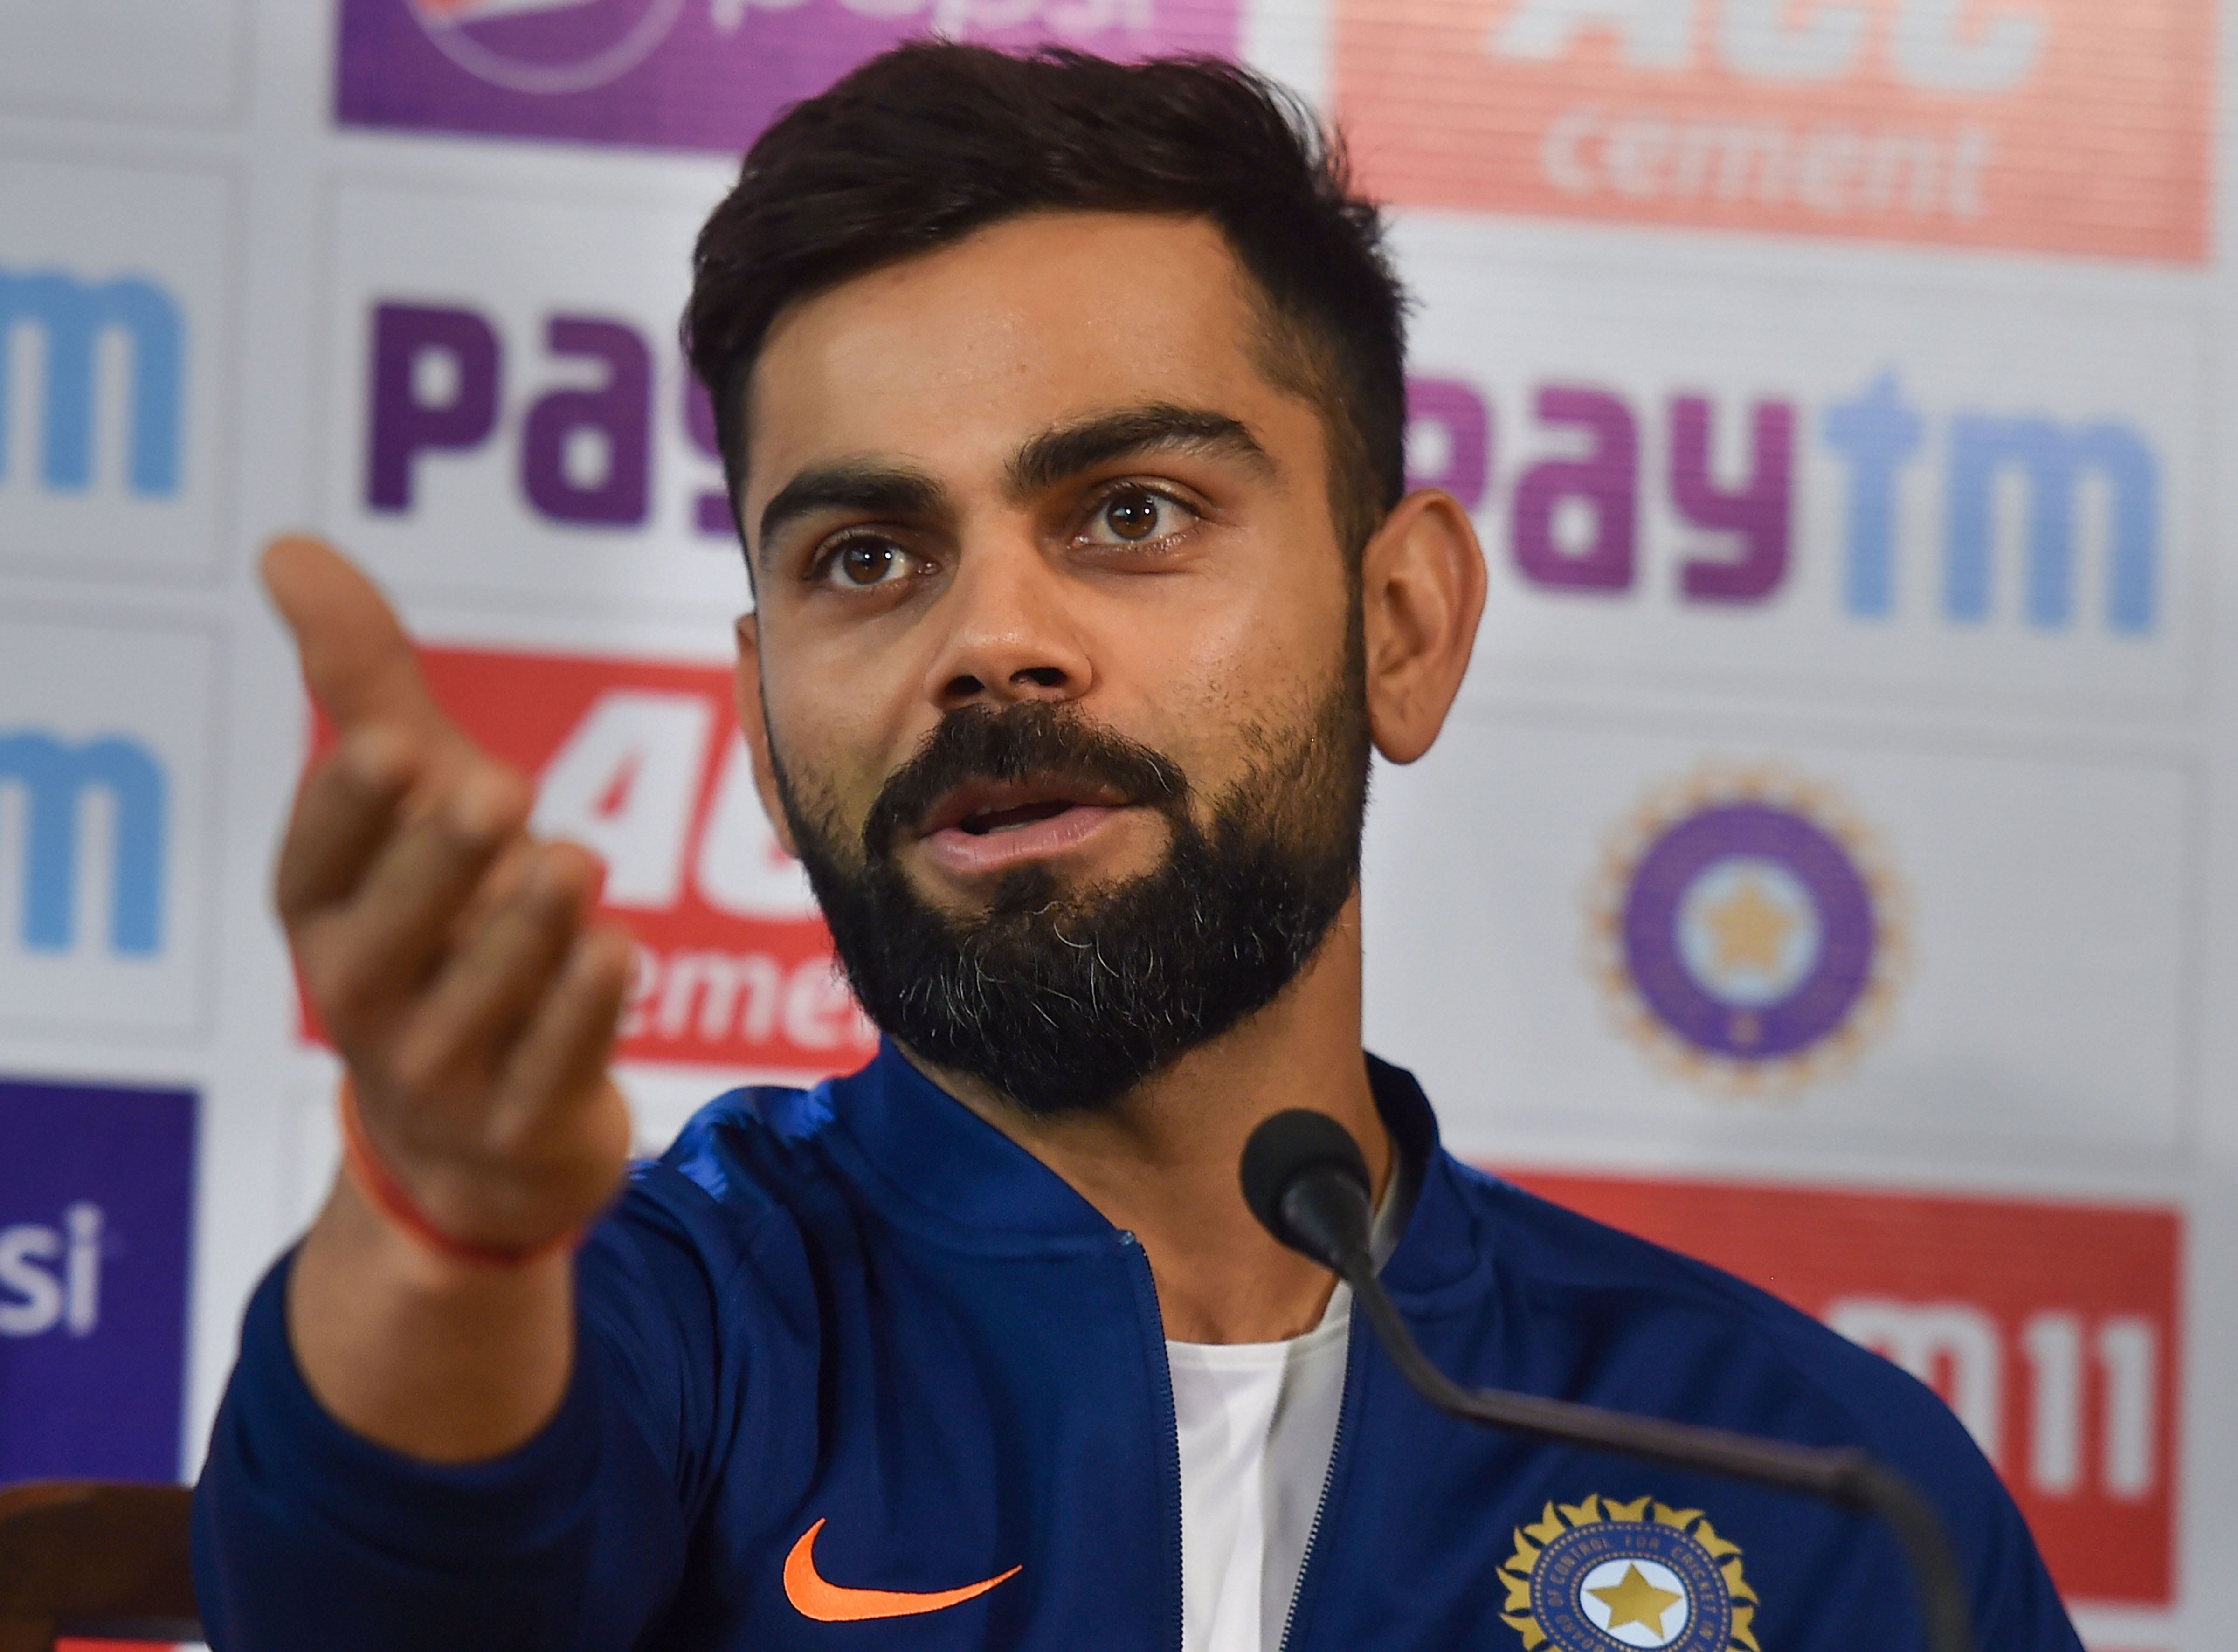 Today S Photo Virat Kohli Addresses A Press Conference On The Eve Of The 1st Pink Ball Day